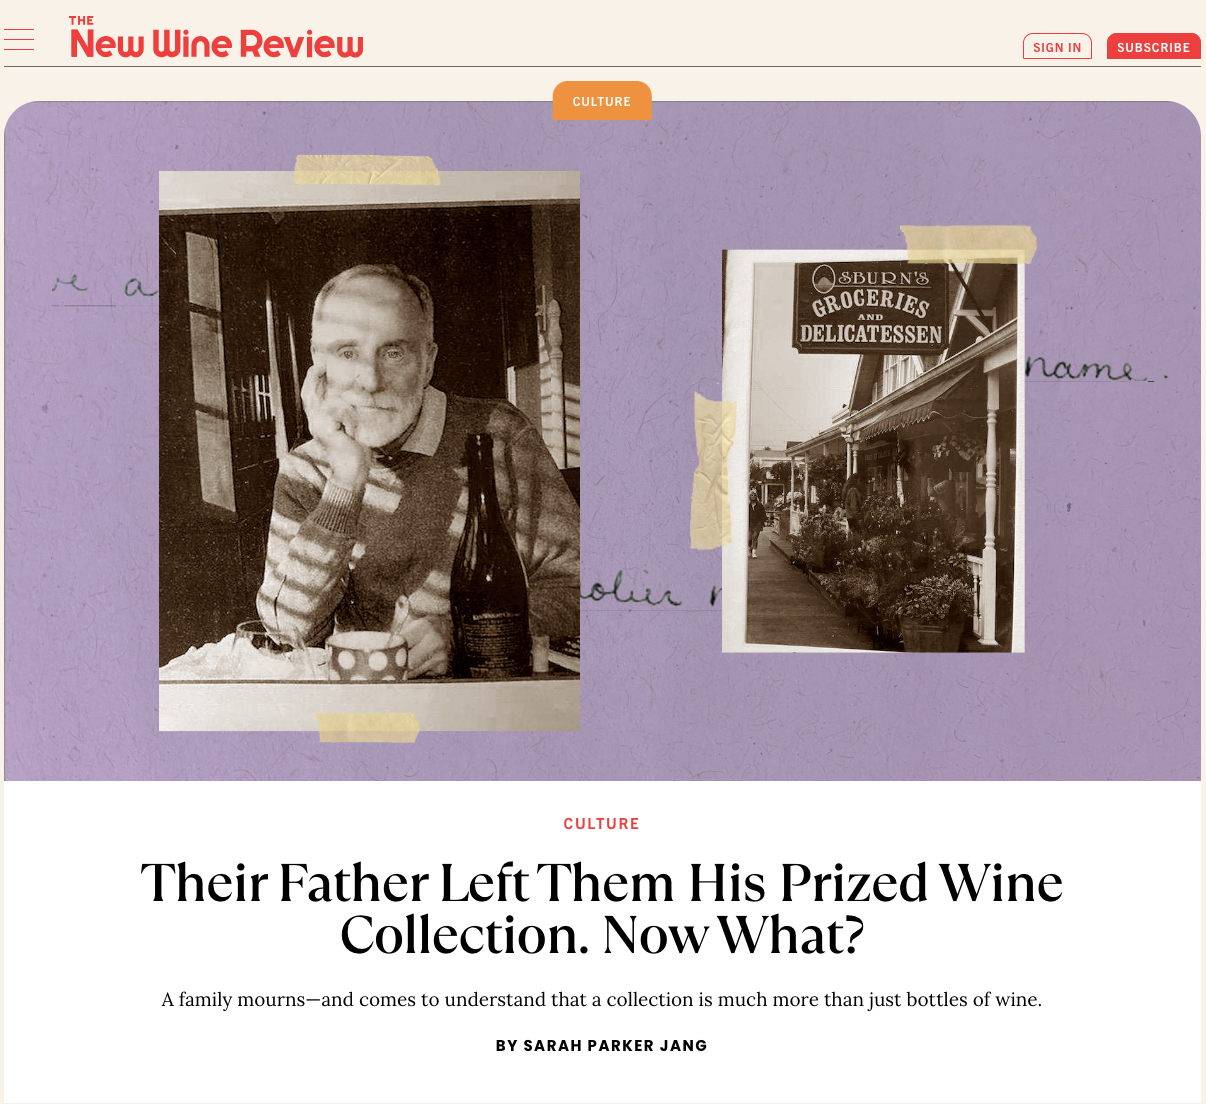 The new wine review